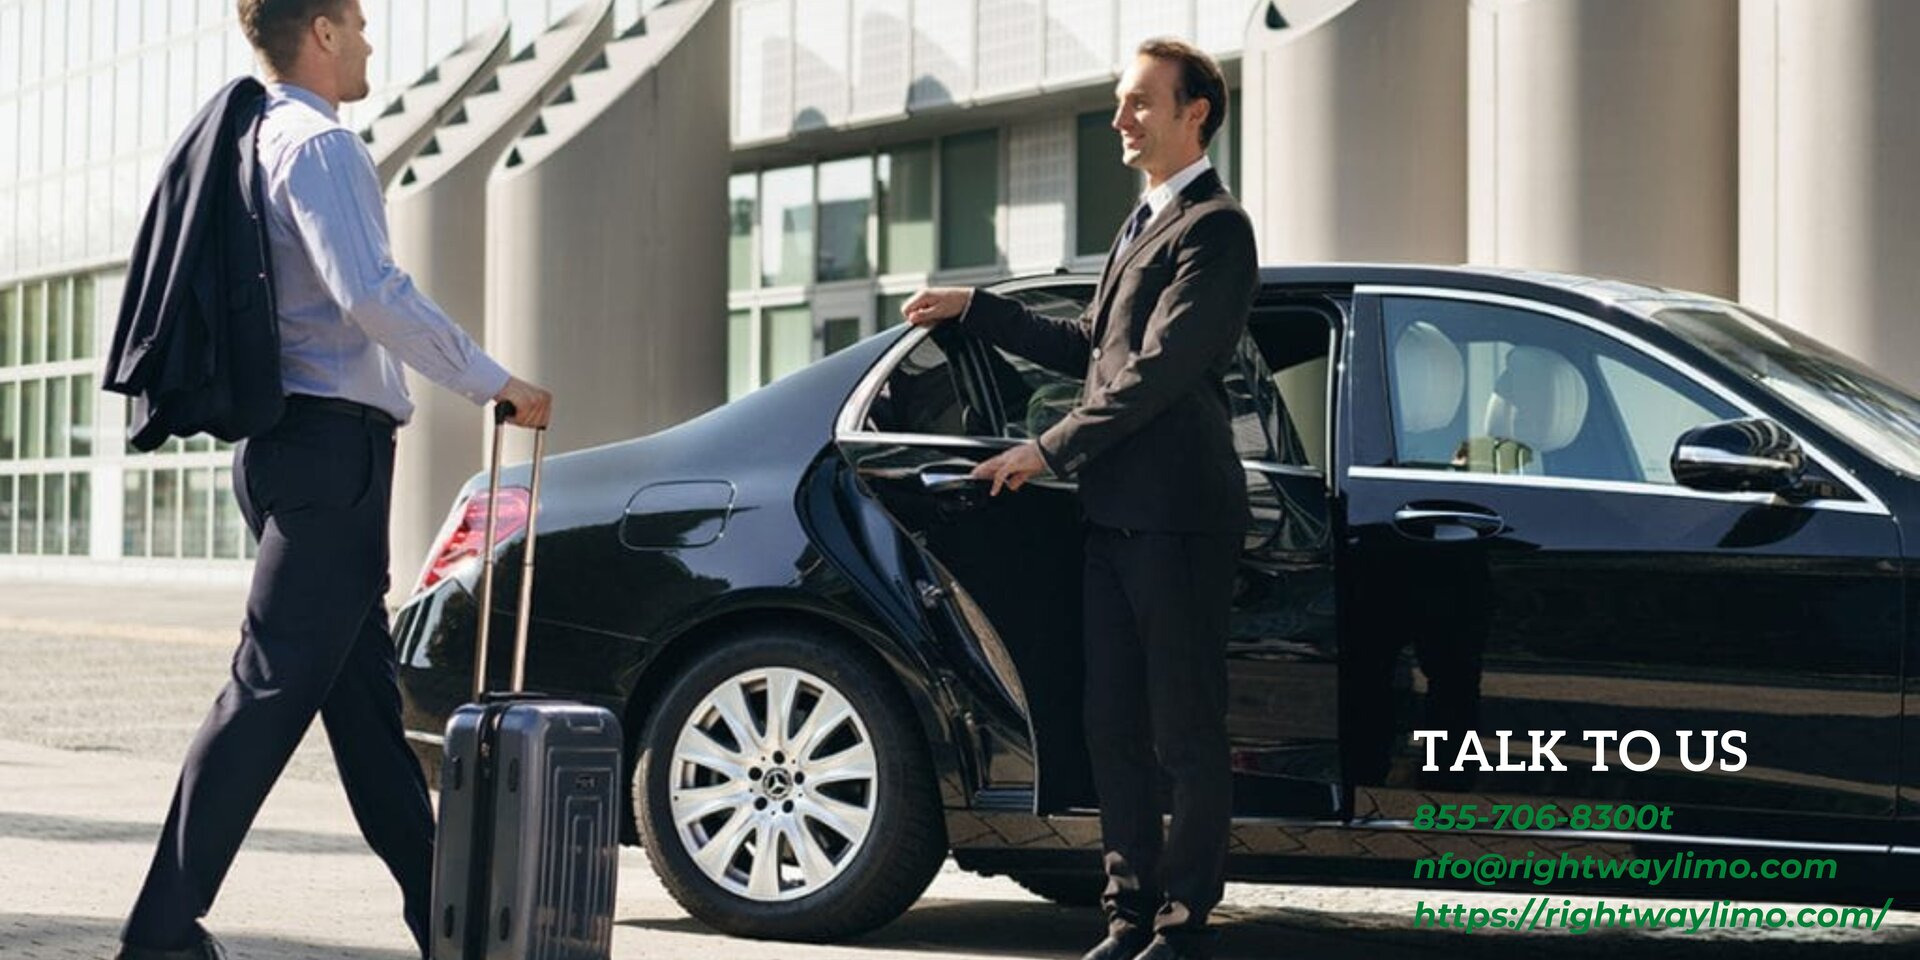 Why You Should Consider Rightway Limo Services in California? – Telegraph